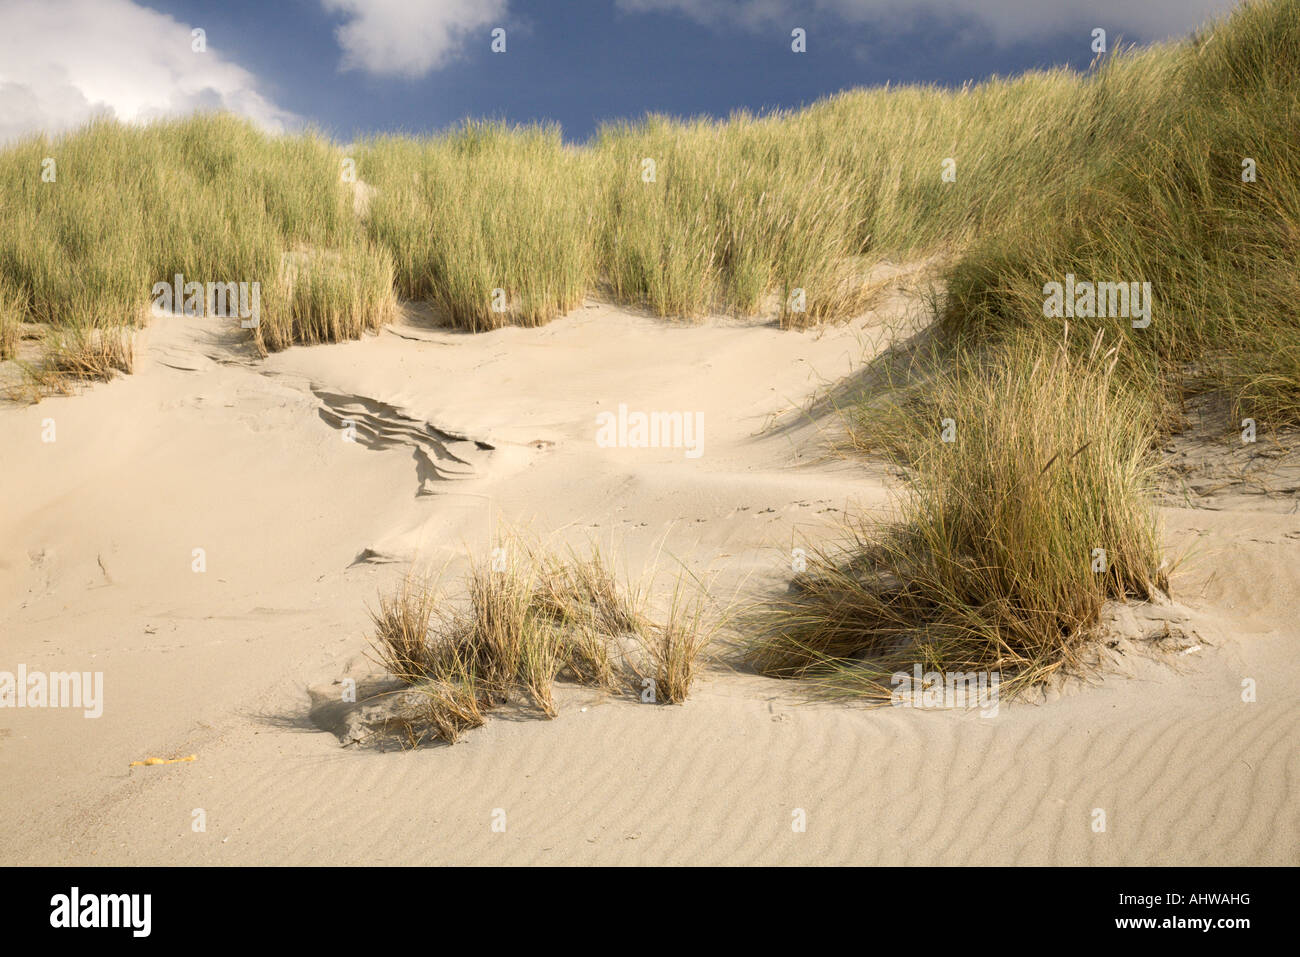 Beach and outer dunes, Haamstede, Zealand, Netherlands Stock Photo